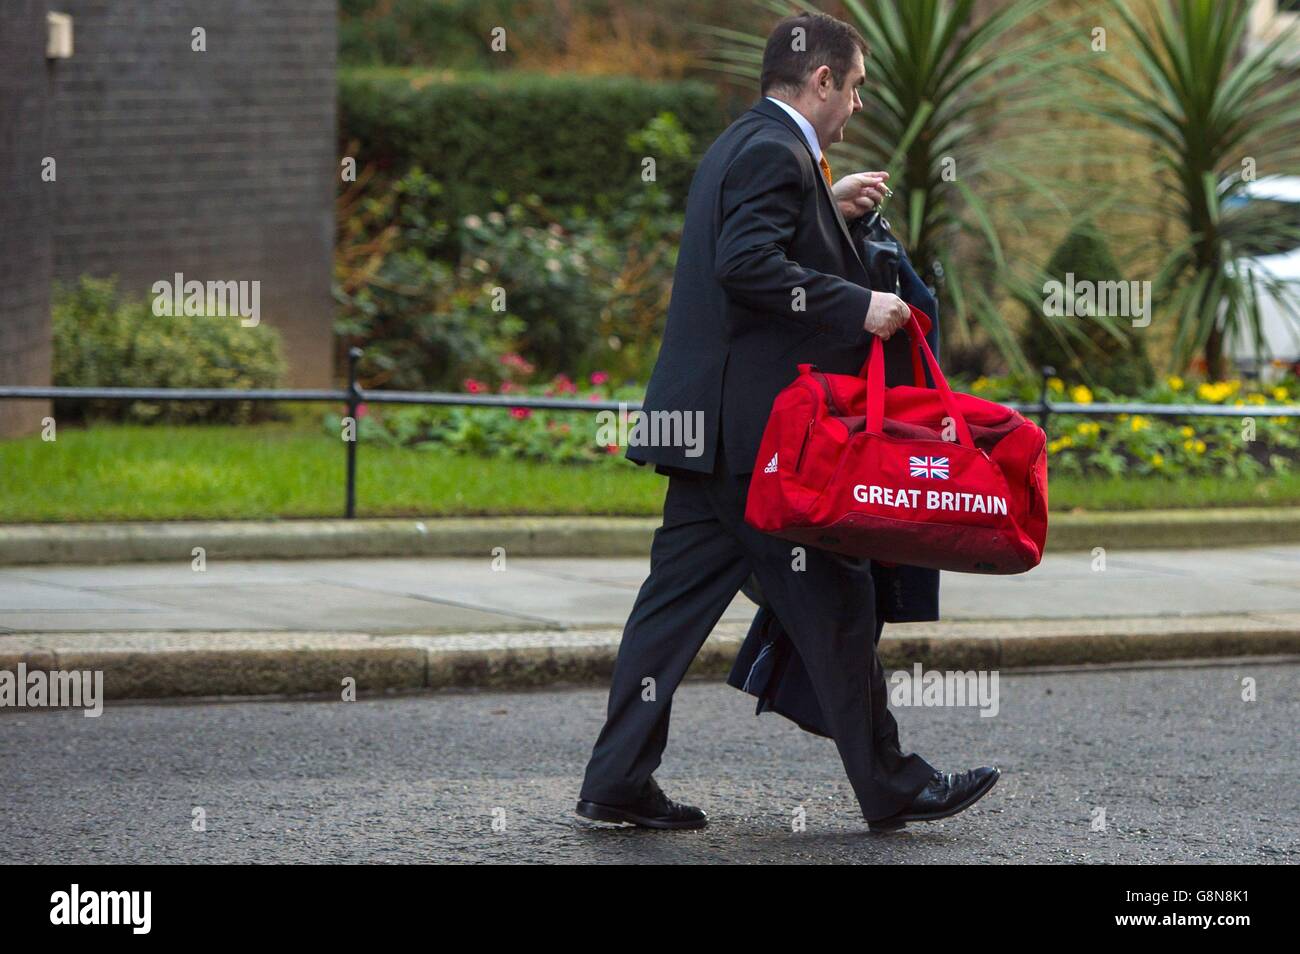 A member of staff carries a bag labelled 'Great Britain' out of 10 Downing Street in Westminster, London, before Prime Minister David Cameron headed to Brussels for a crunch summit of European leaders with key elements of his demands for change in Britain's relations with the EU still in dispute. Stock Photo